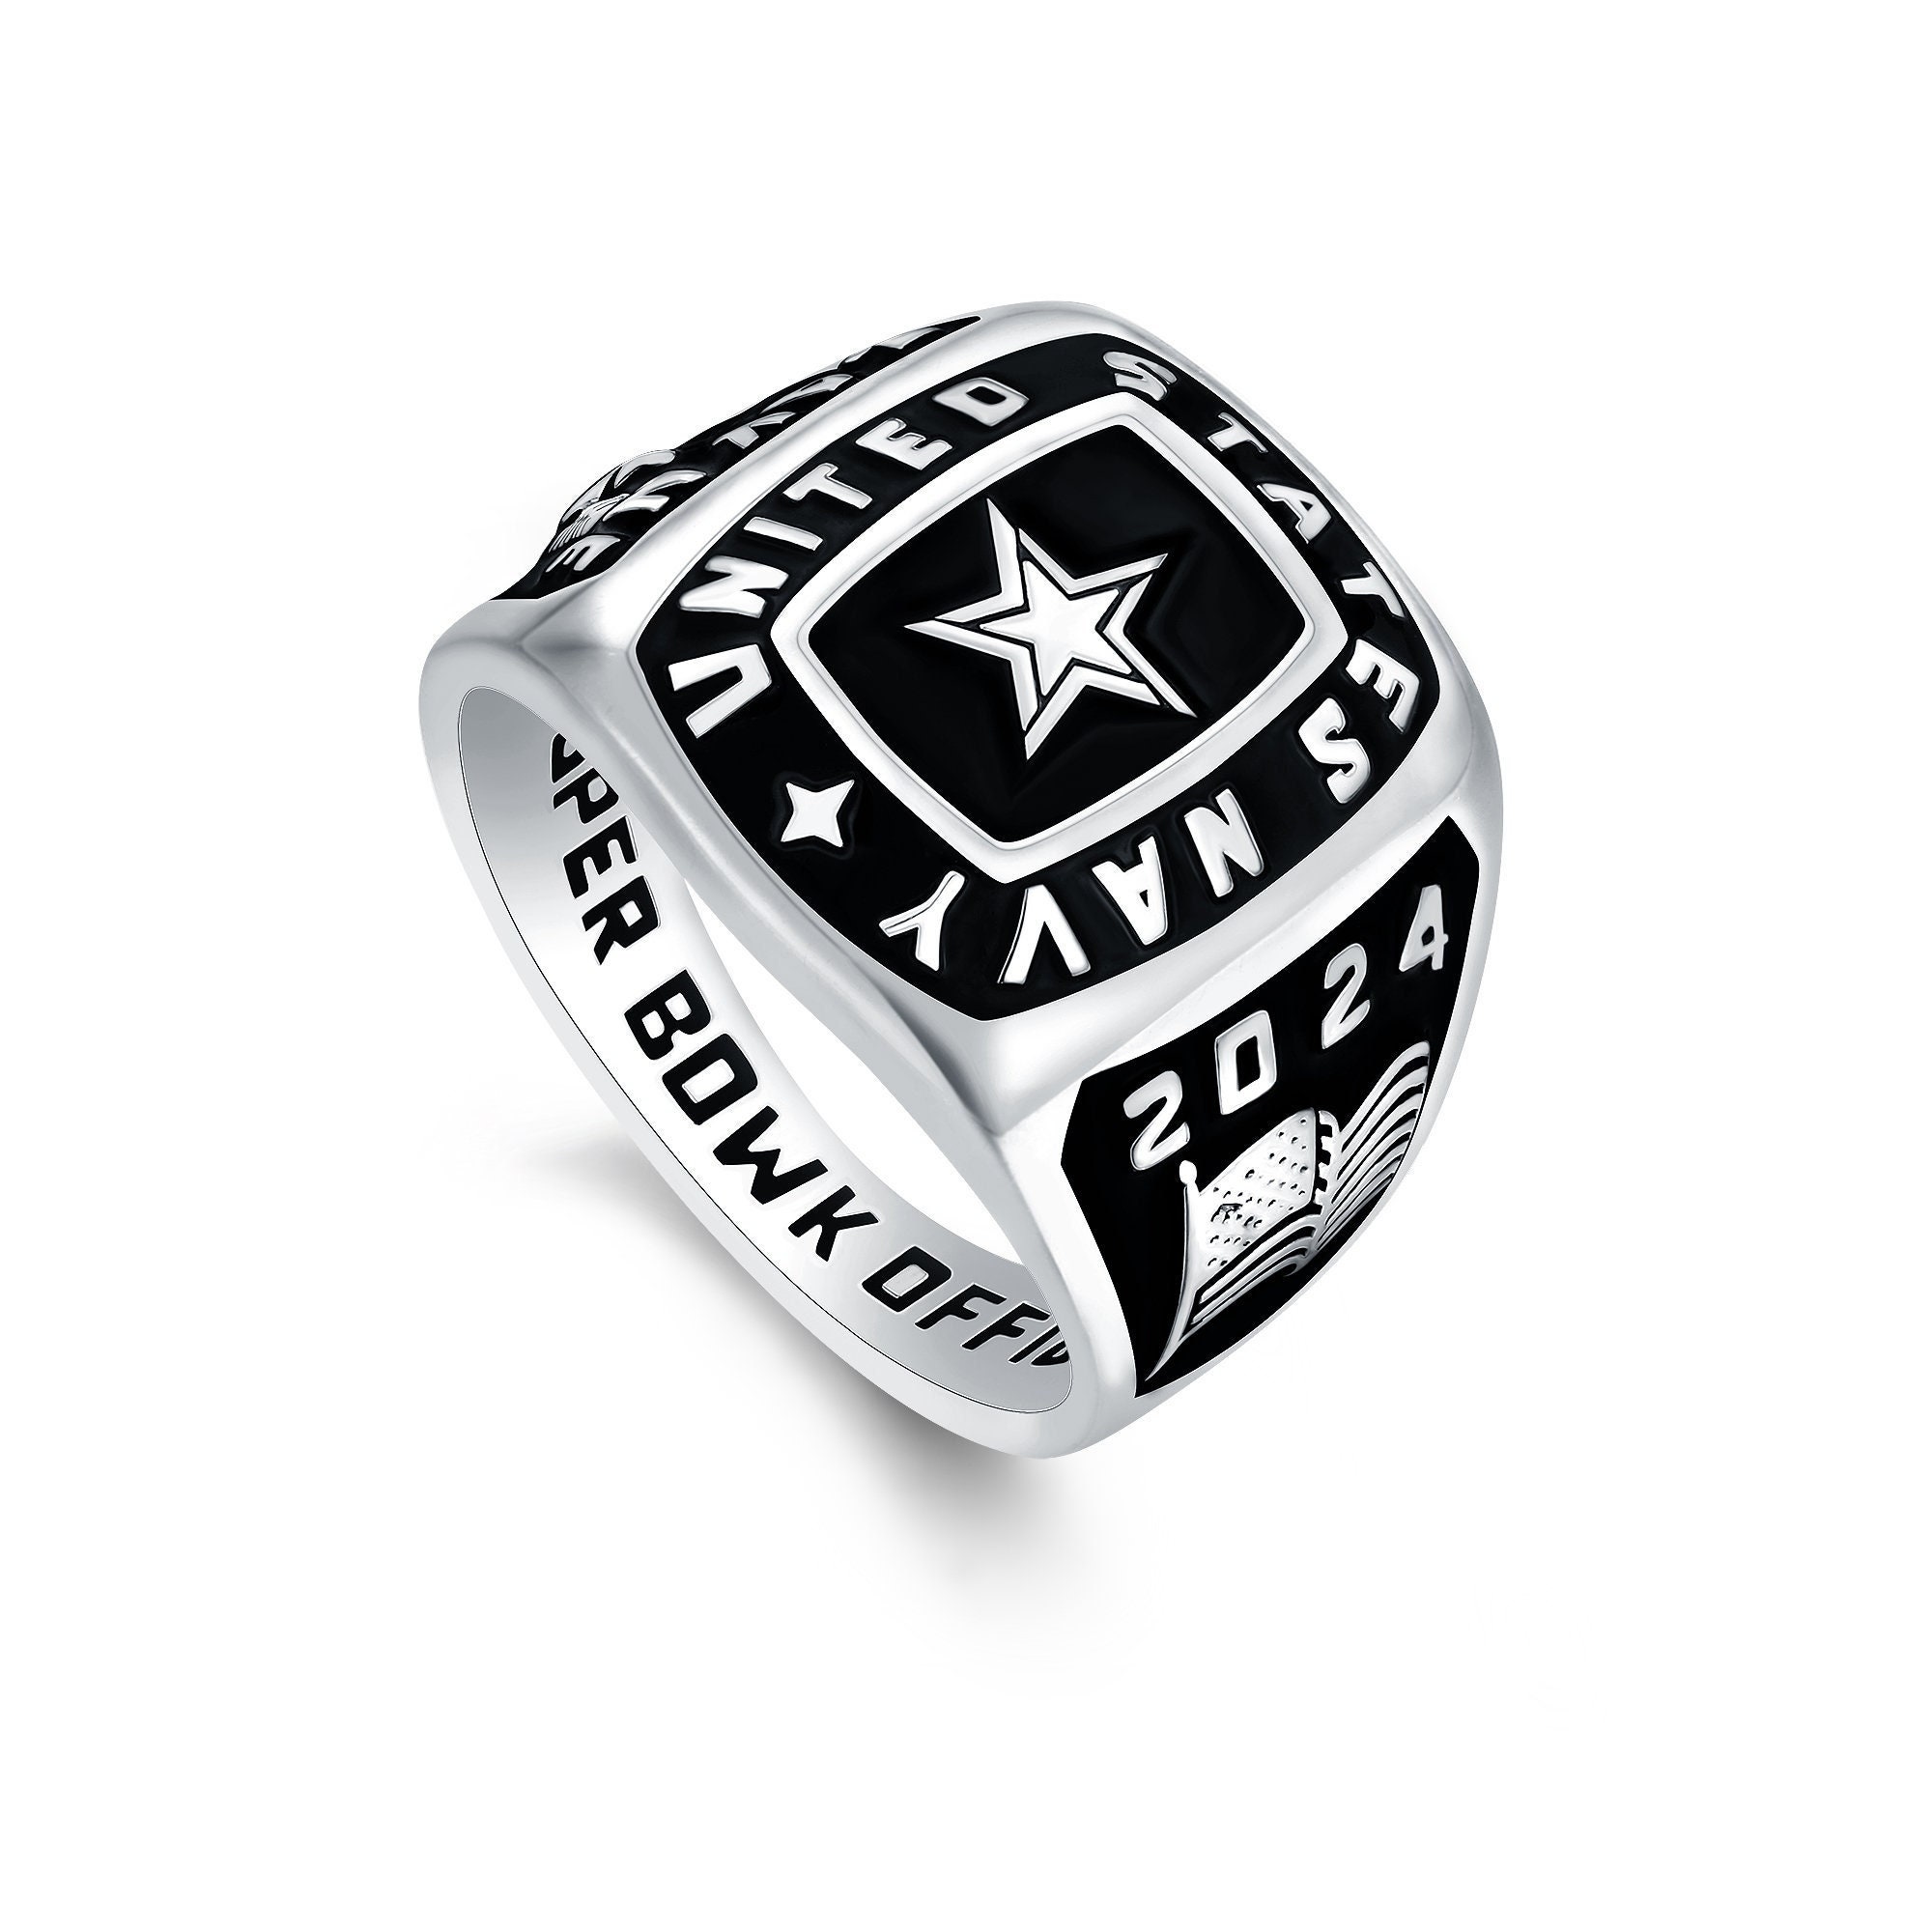 YVO Personalized Air Force Ring - Free Engraving Included - Black - Size  8|Amazon.com